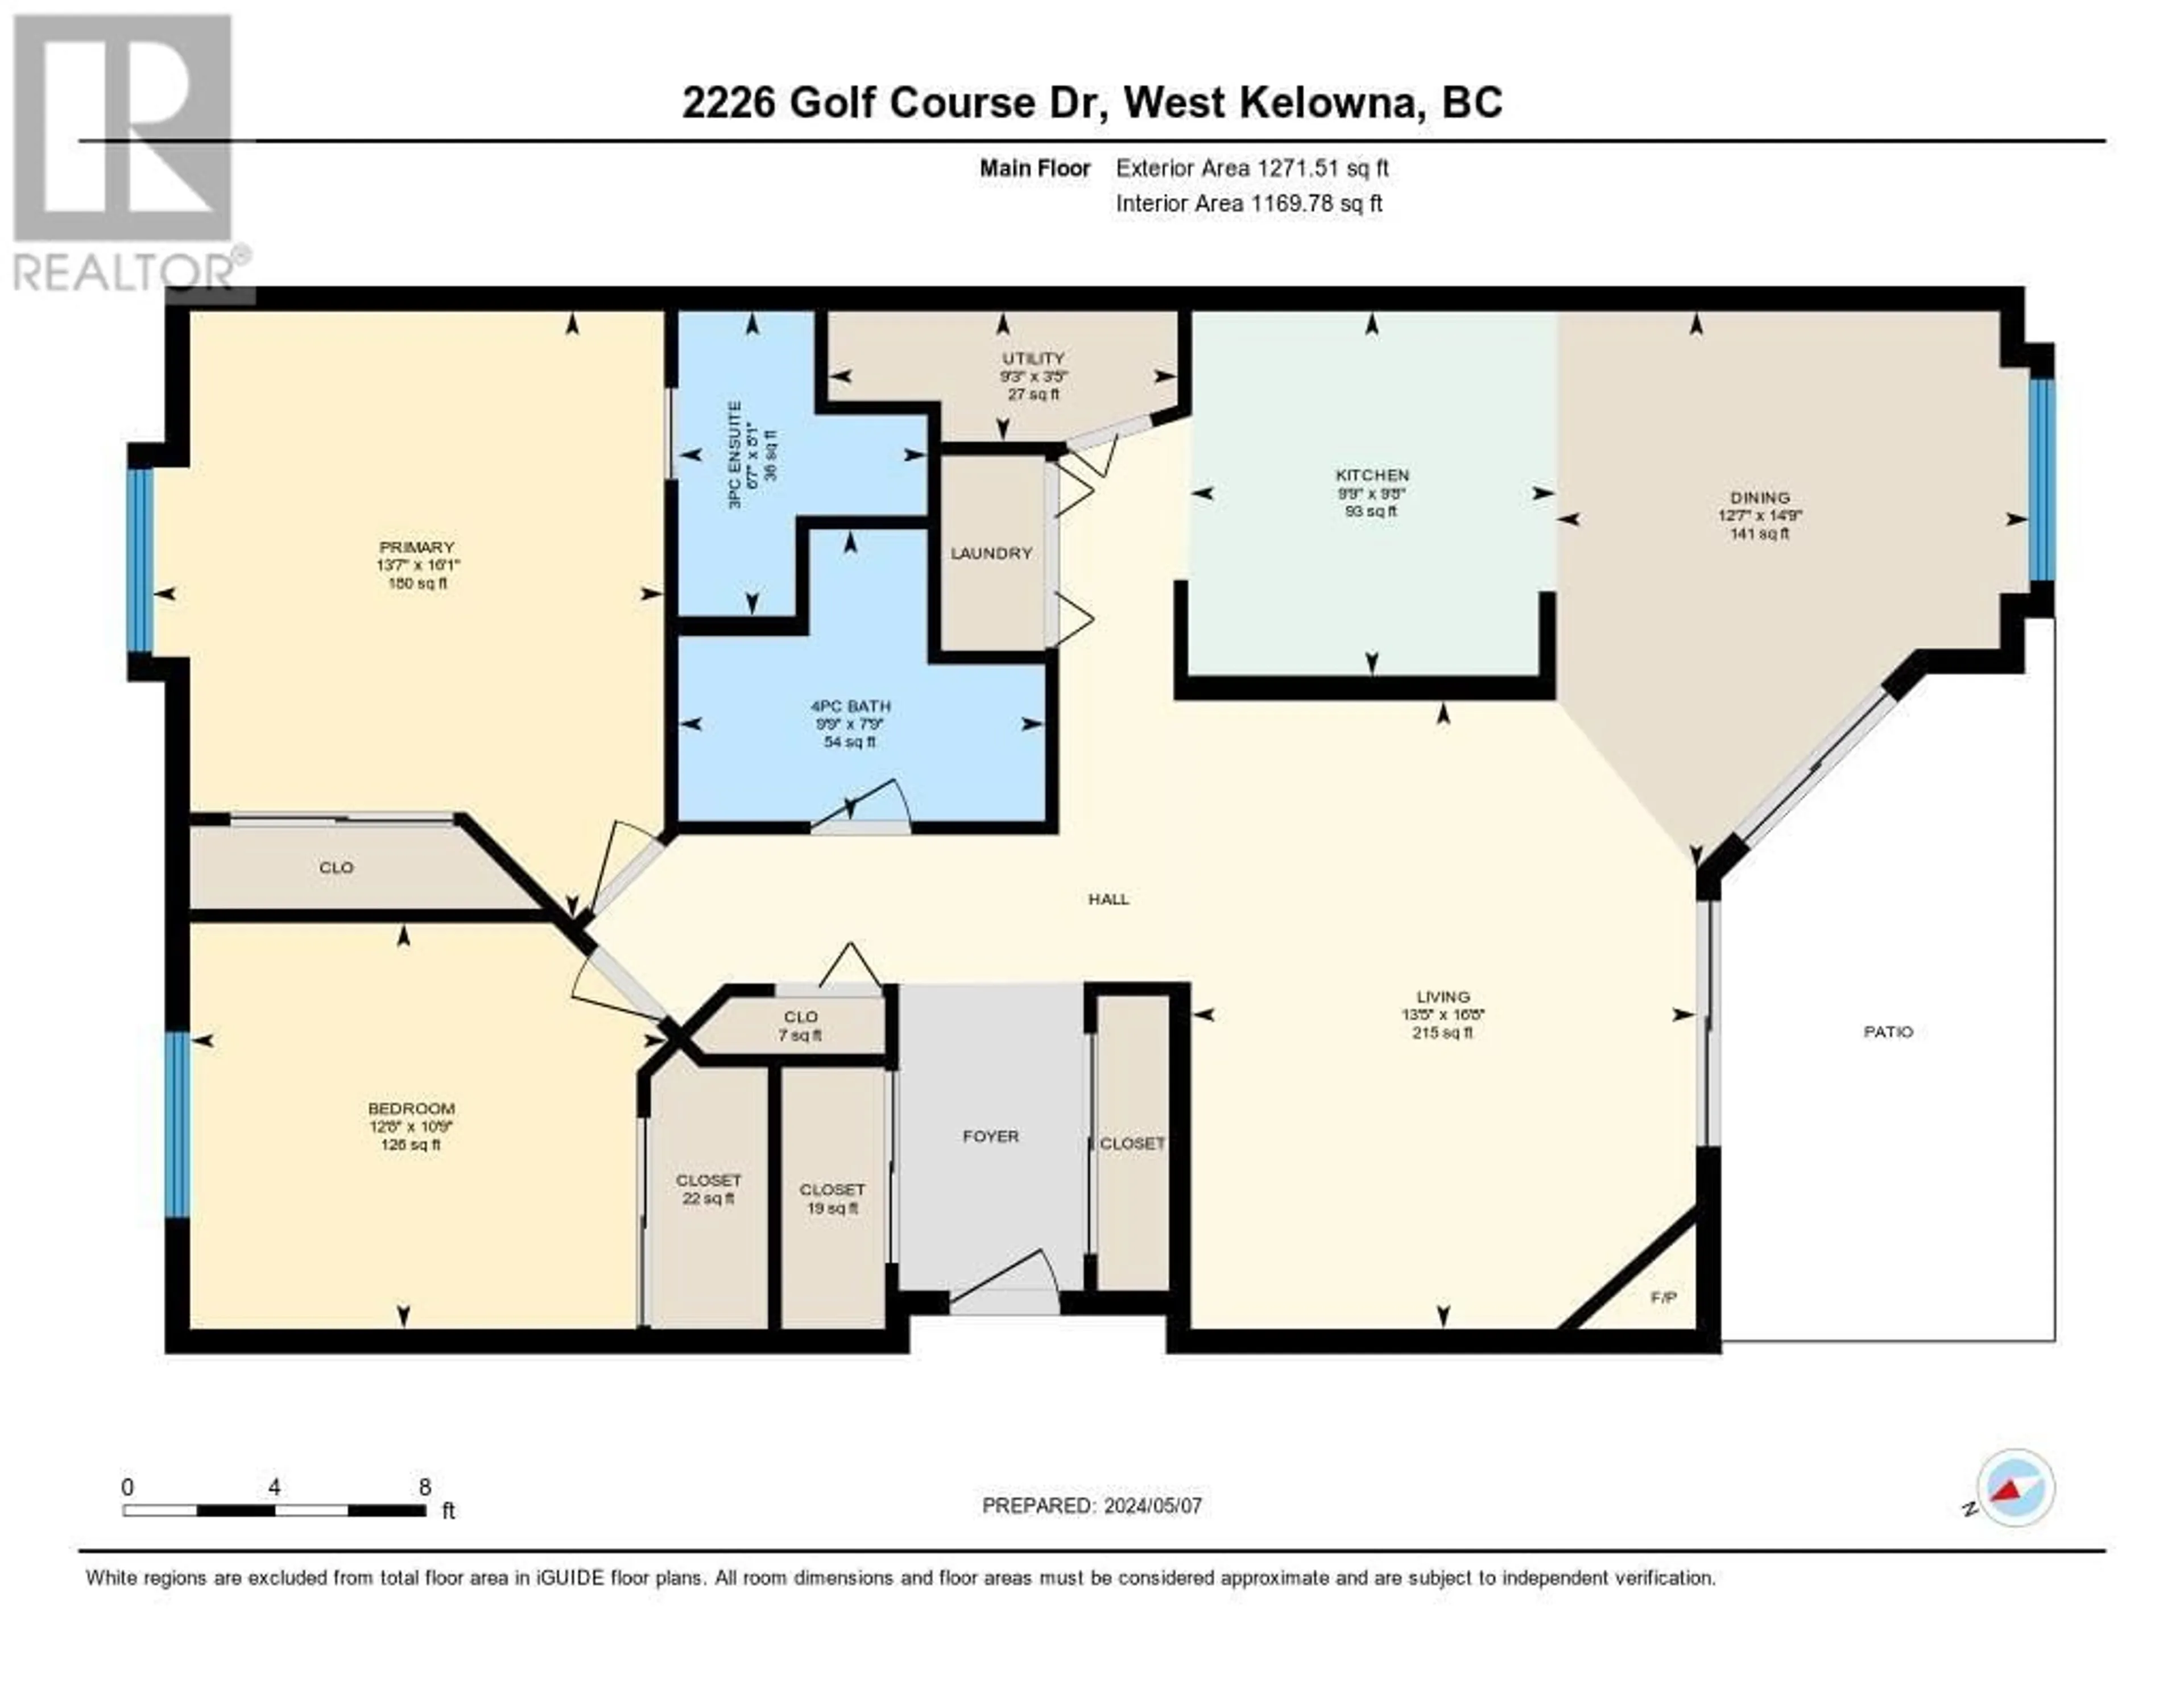 Floor plan for 2226 Golf Course Drive, West Kelowna British Columbia V4T2V4